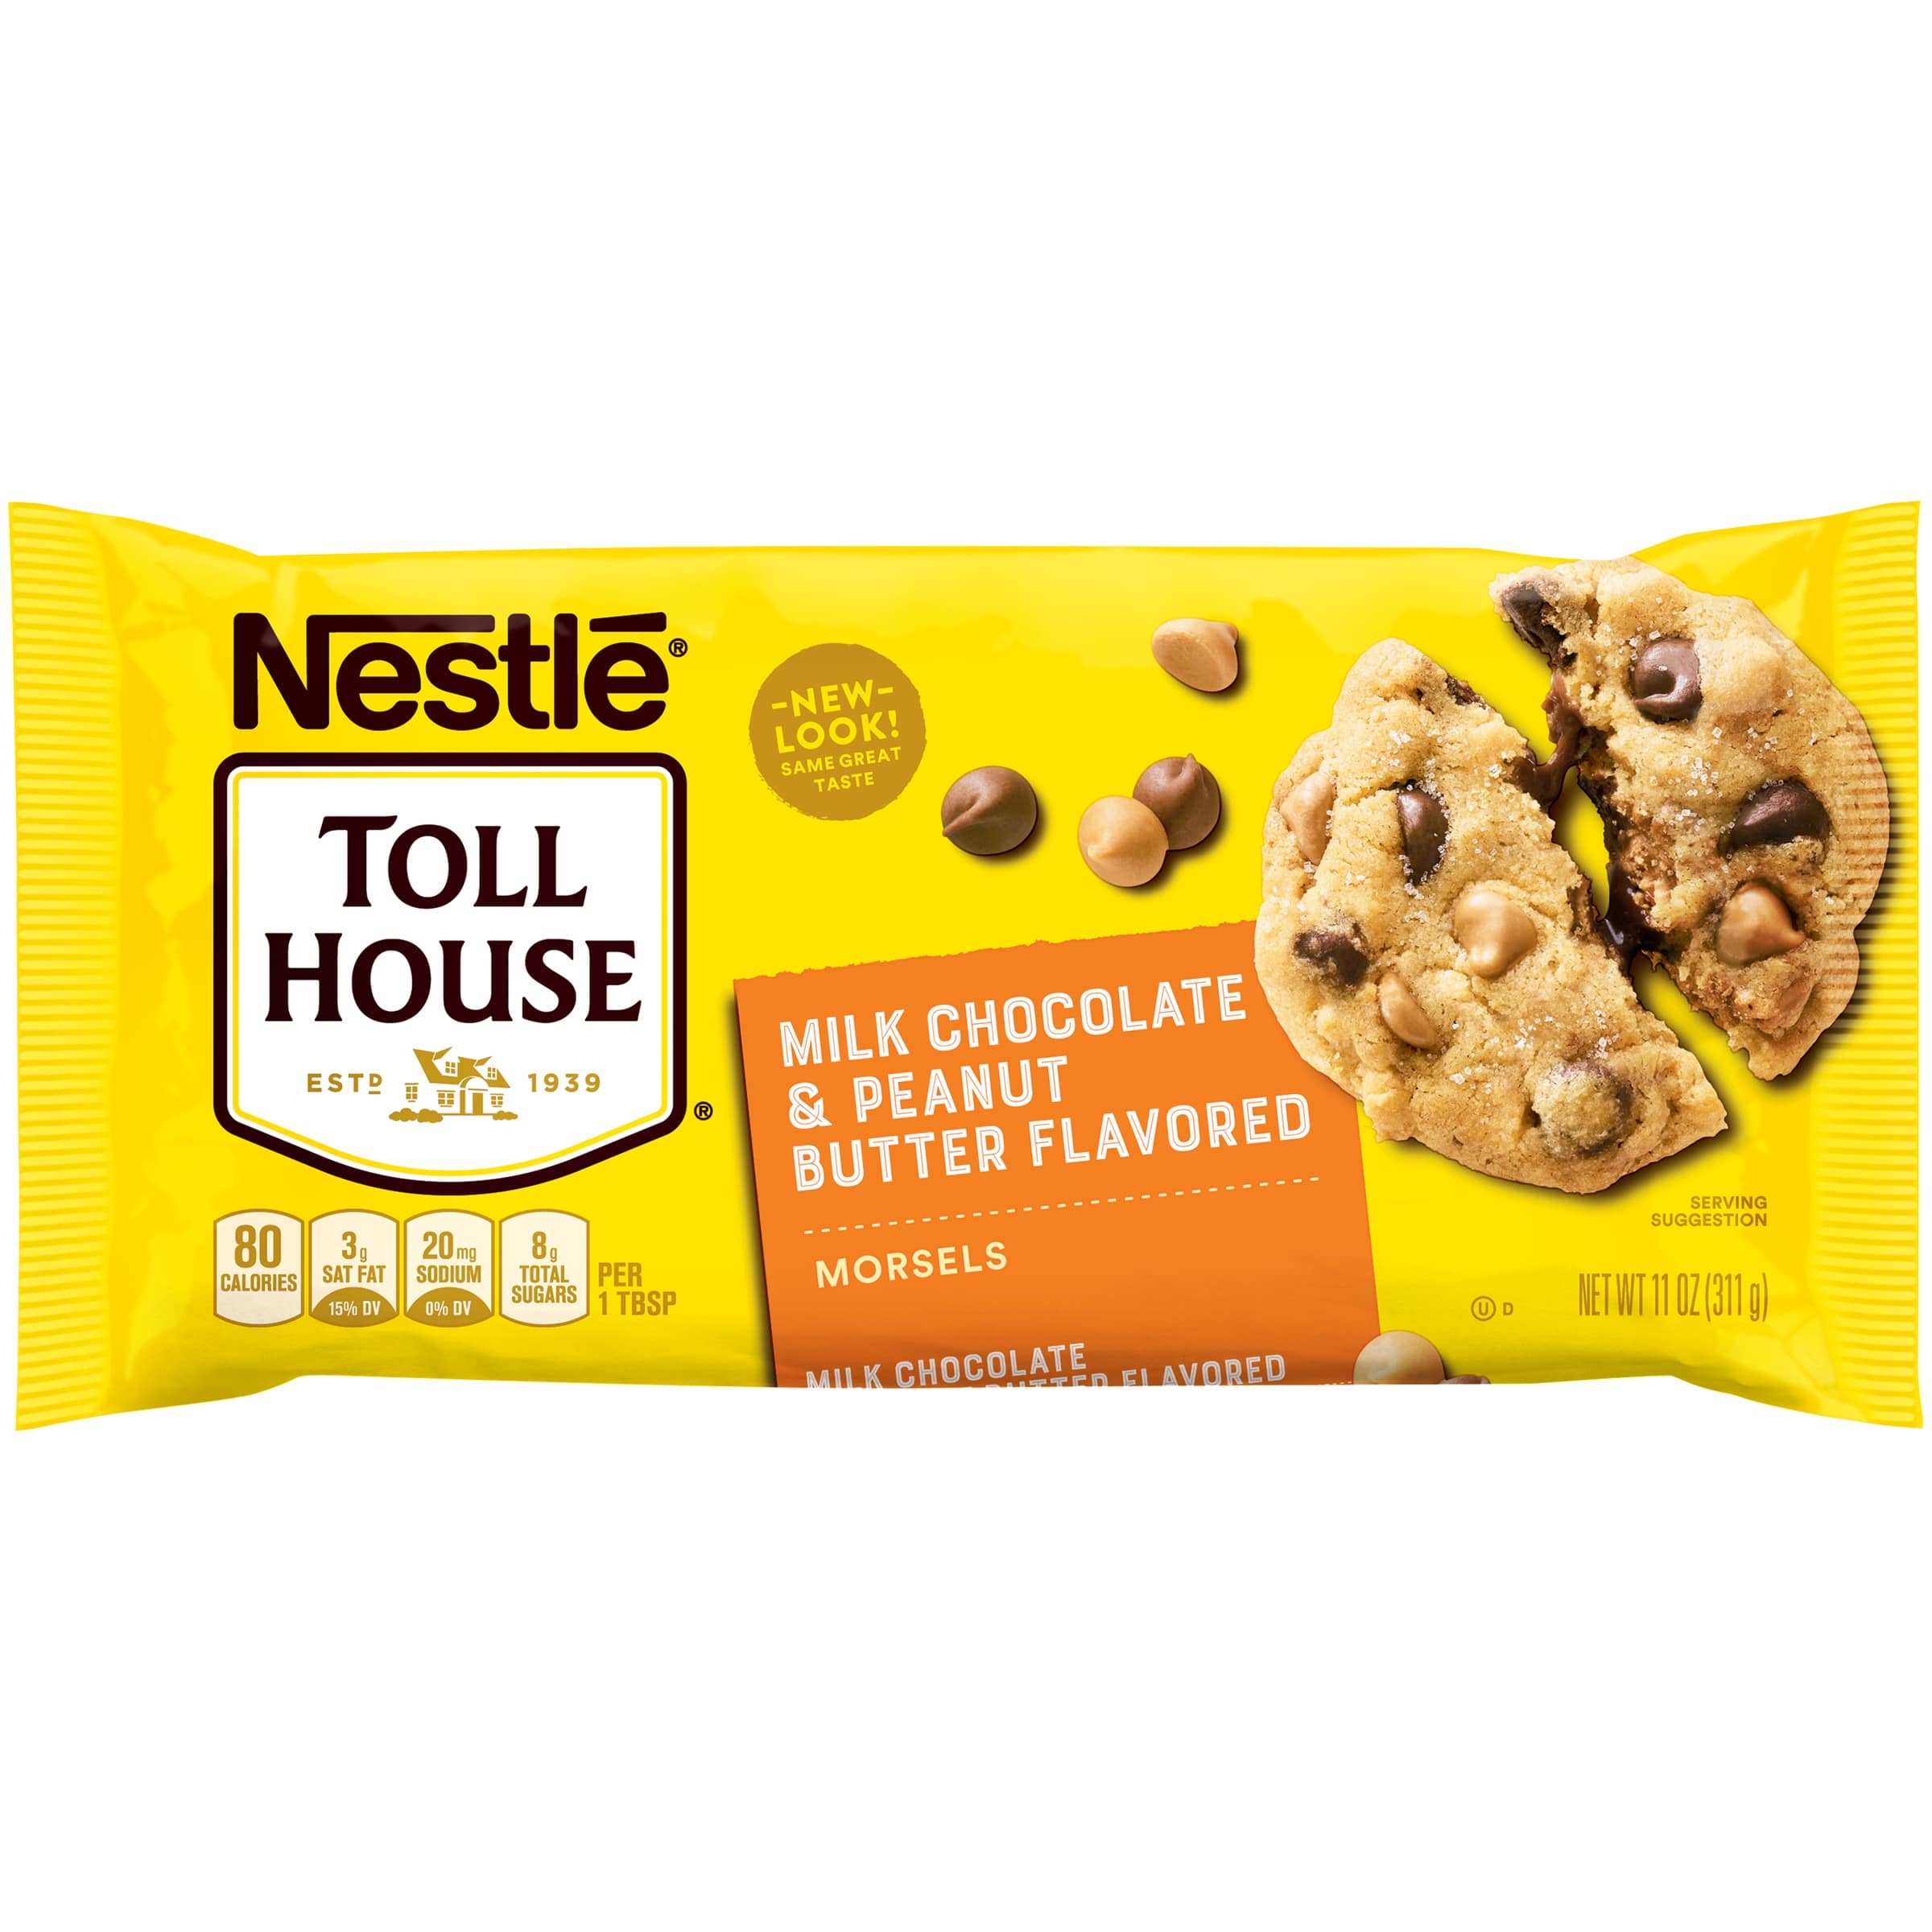 Toll House Milk Chocolate & Peanut Butter Morsels